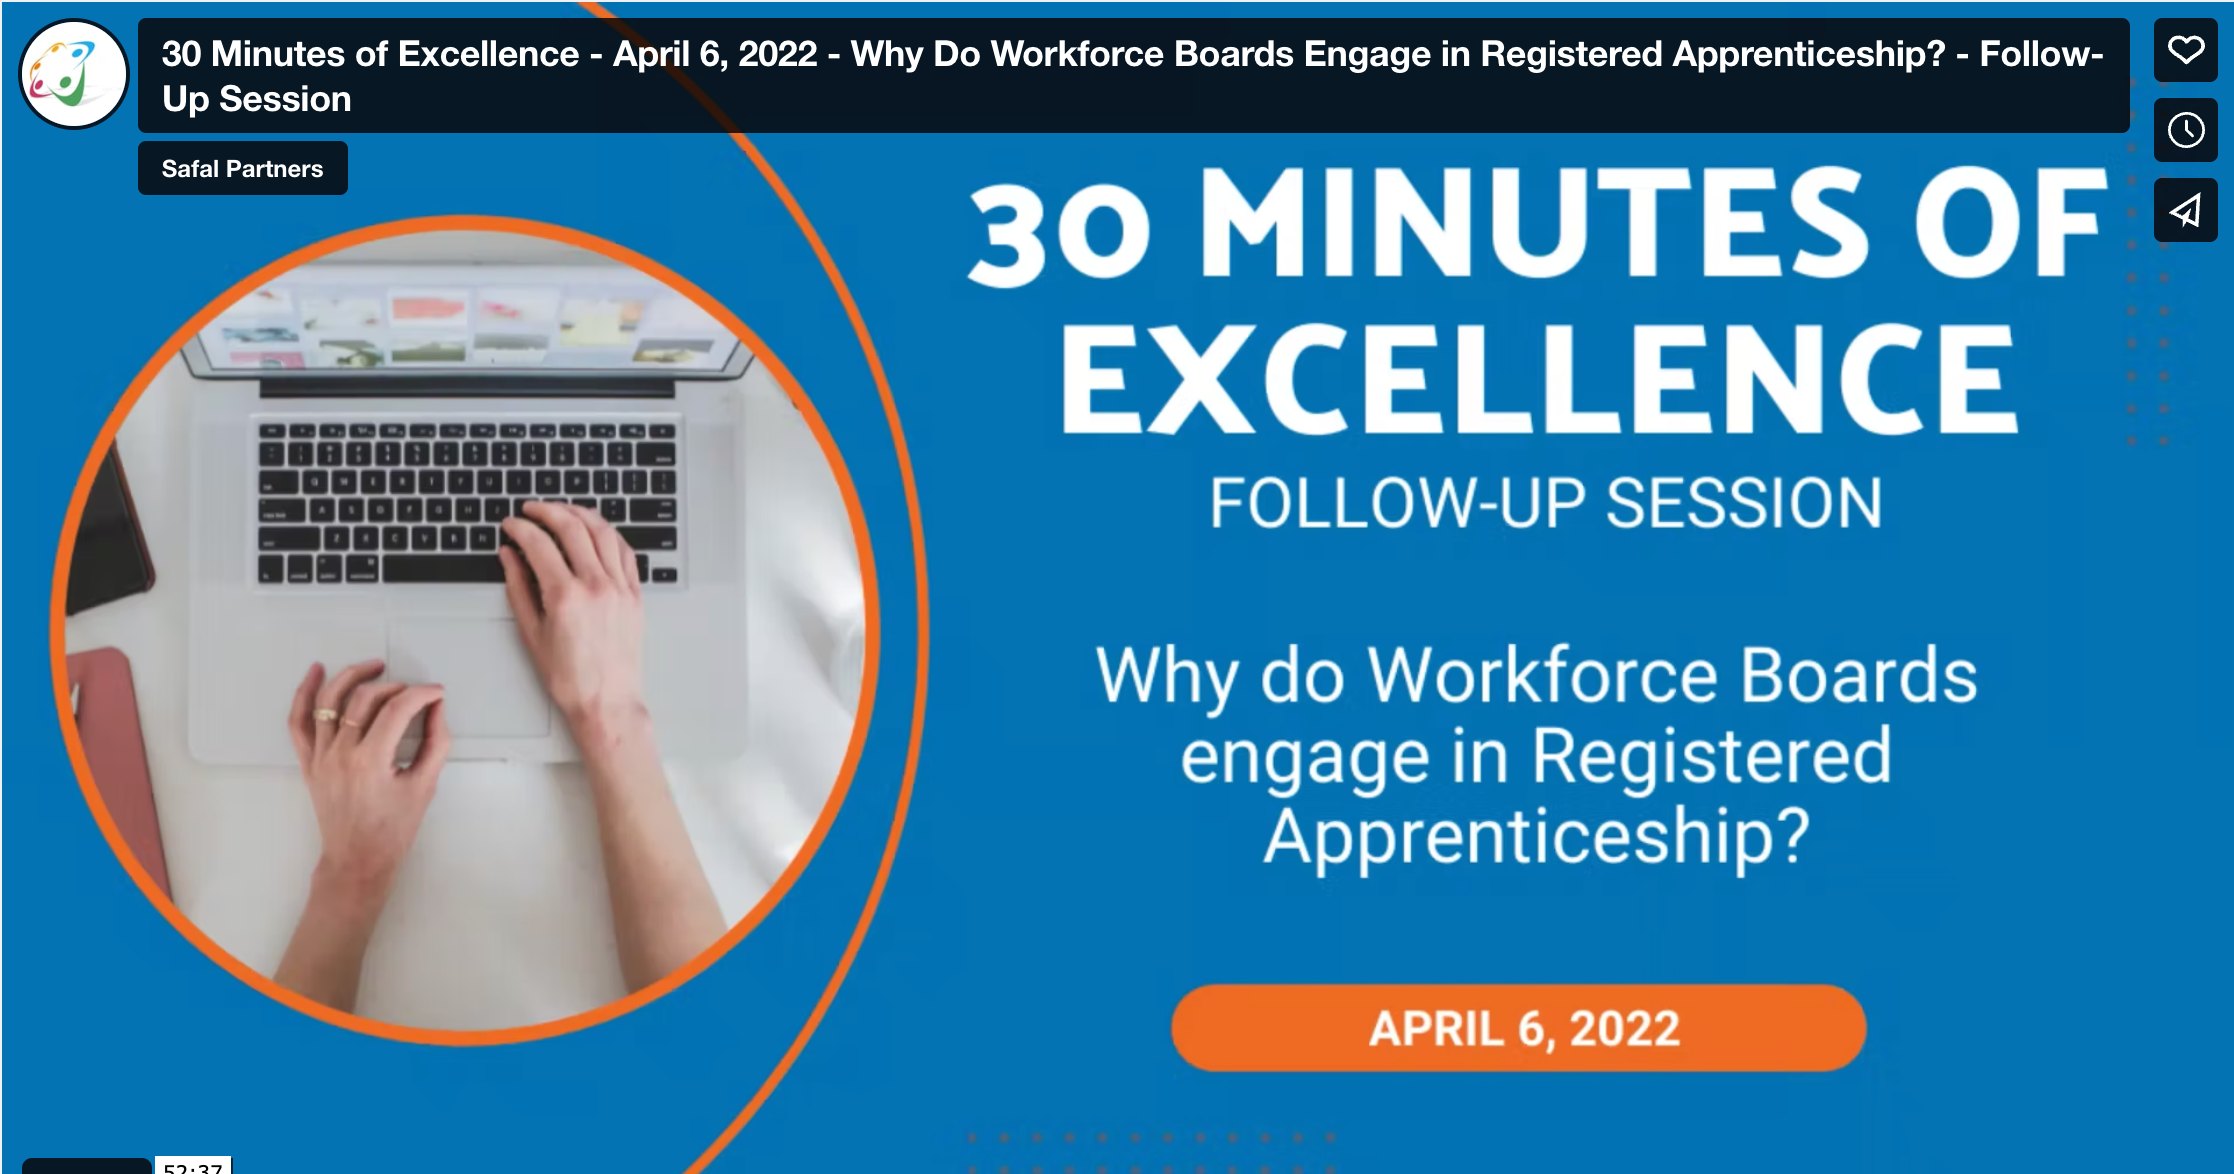 30 Minutes of Excellence - Why Do Workforce Boards Engage in Registered Apprenticeship?